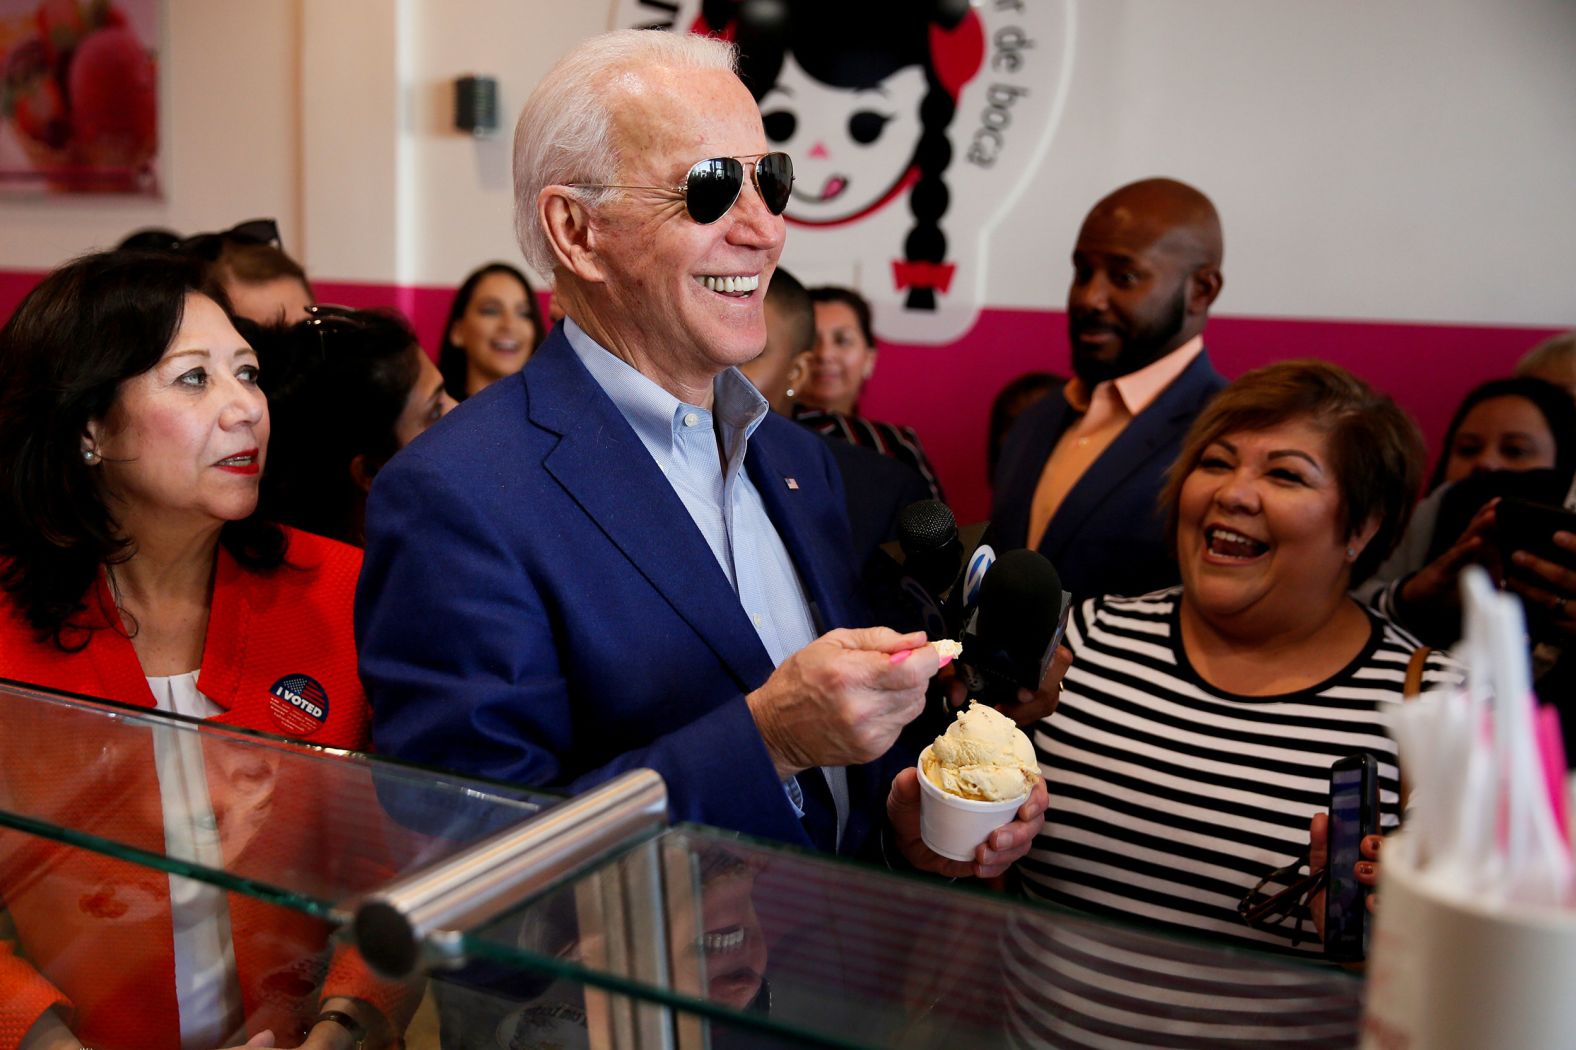 Biden enjoys some ice cream while campaigning in Los Angeles on Tuesday.